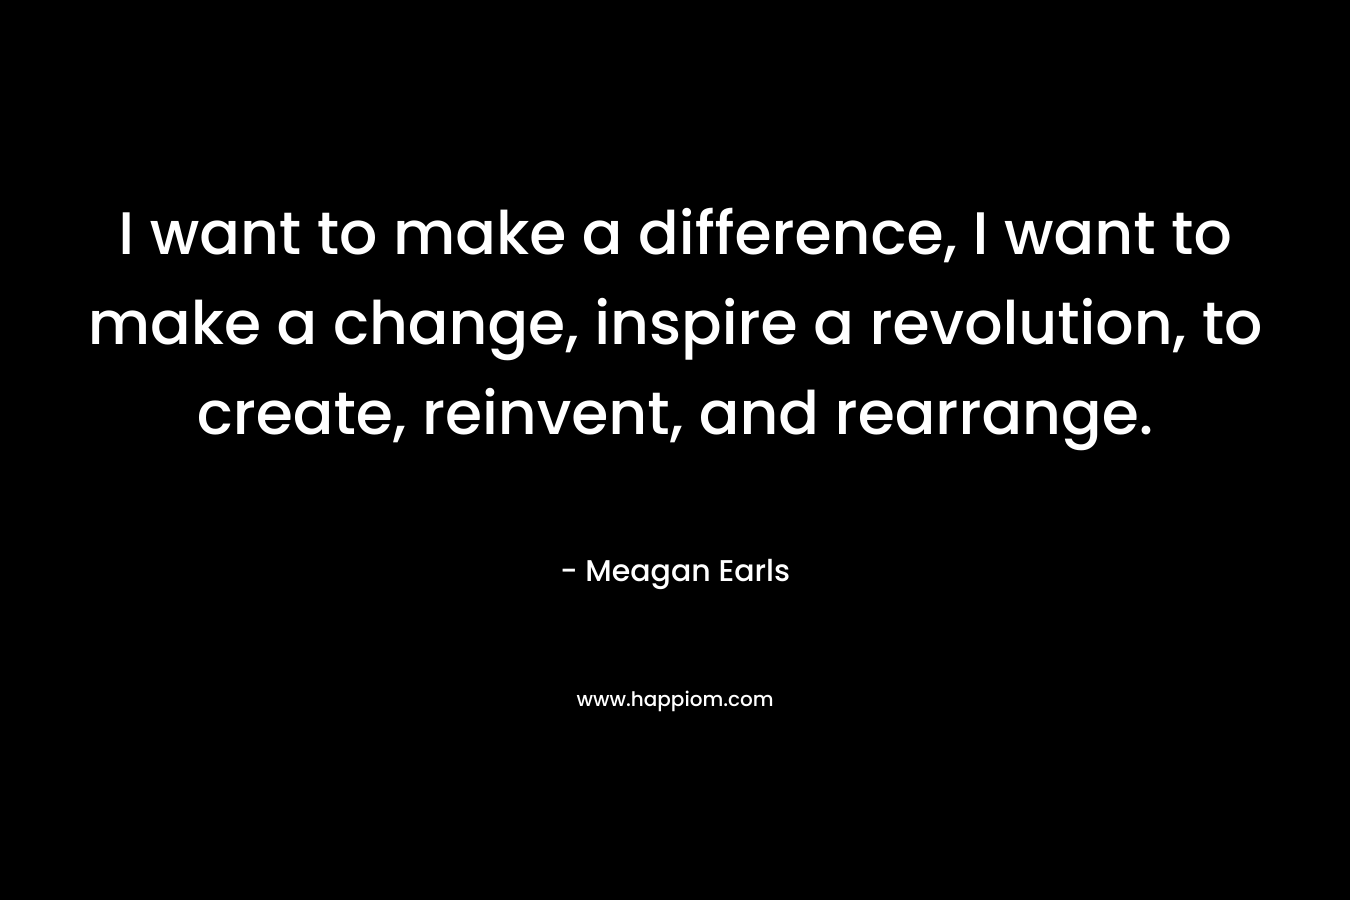 I want to make a difference, I want to make a change, inspire a revolution, to create, reinvent, and rearrange. – Meagan Earls